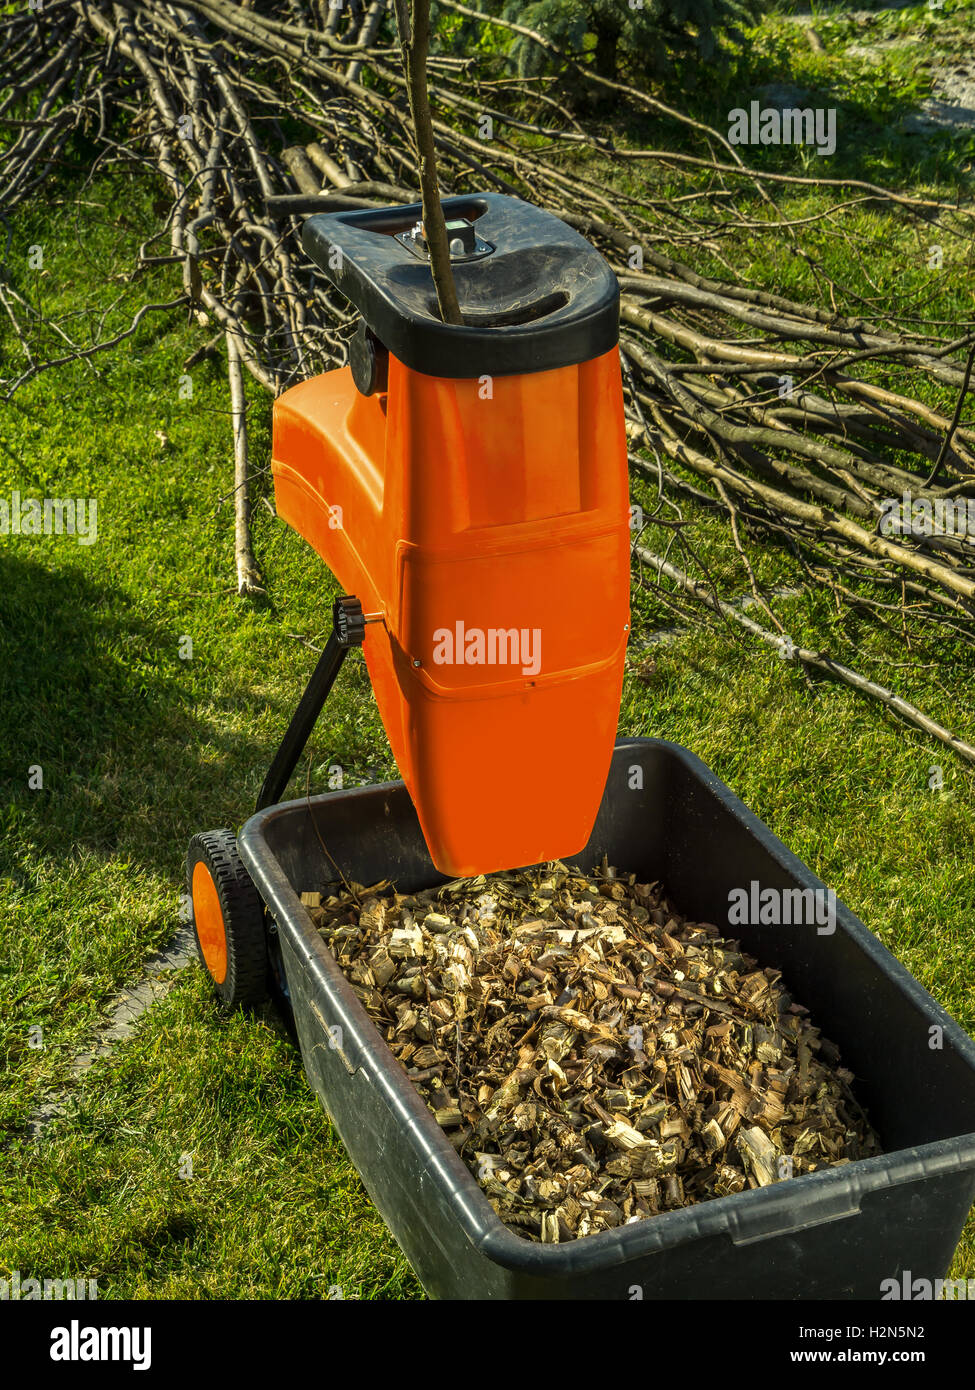 Mulching Machine High Resolution Stock Photography and Images - Alamy